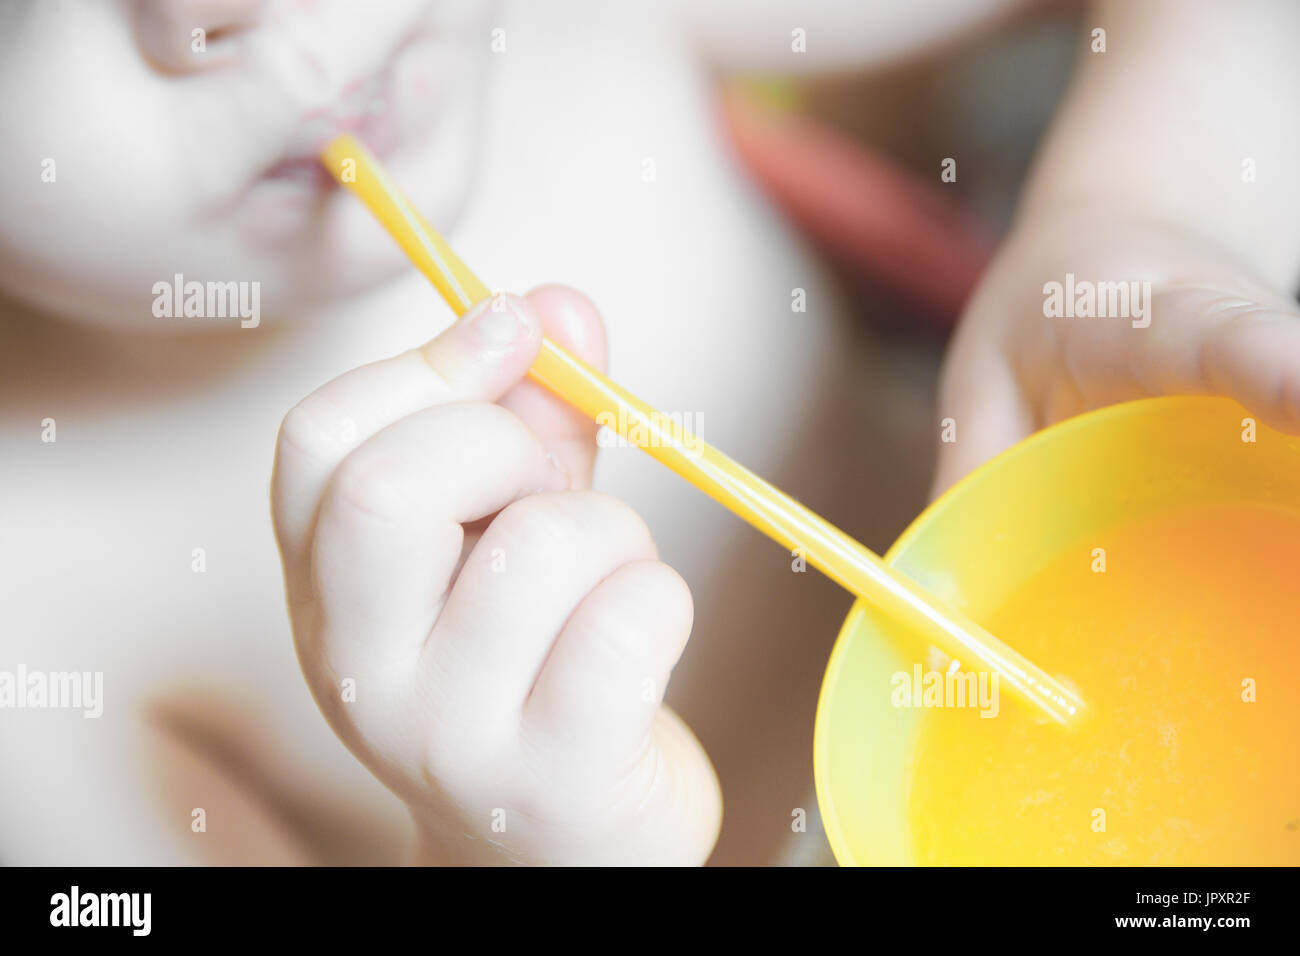 Drinking some fresh orange from a yellow plastic glass using a straw. Top view. Stock Photo